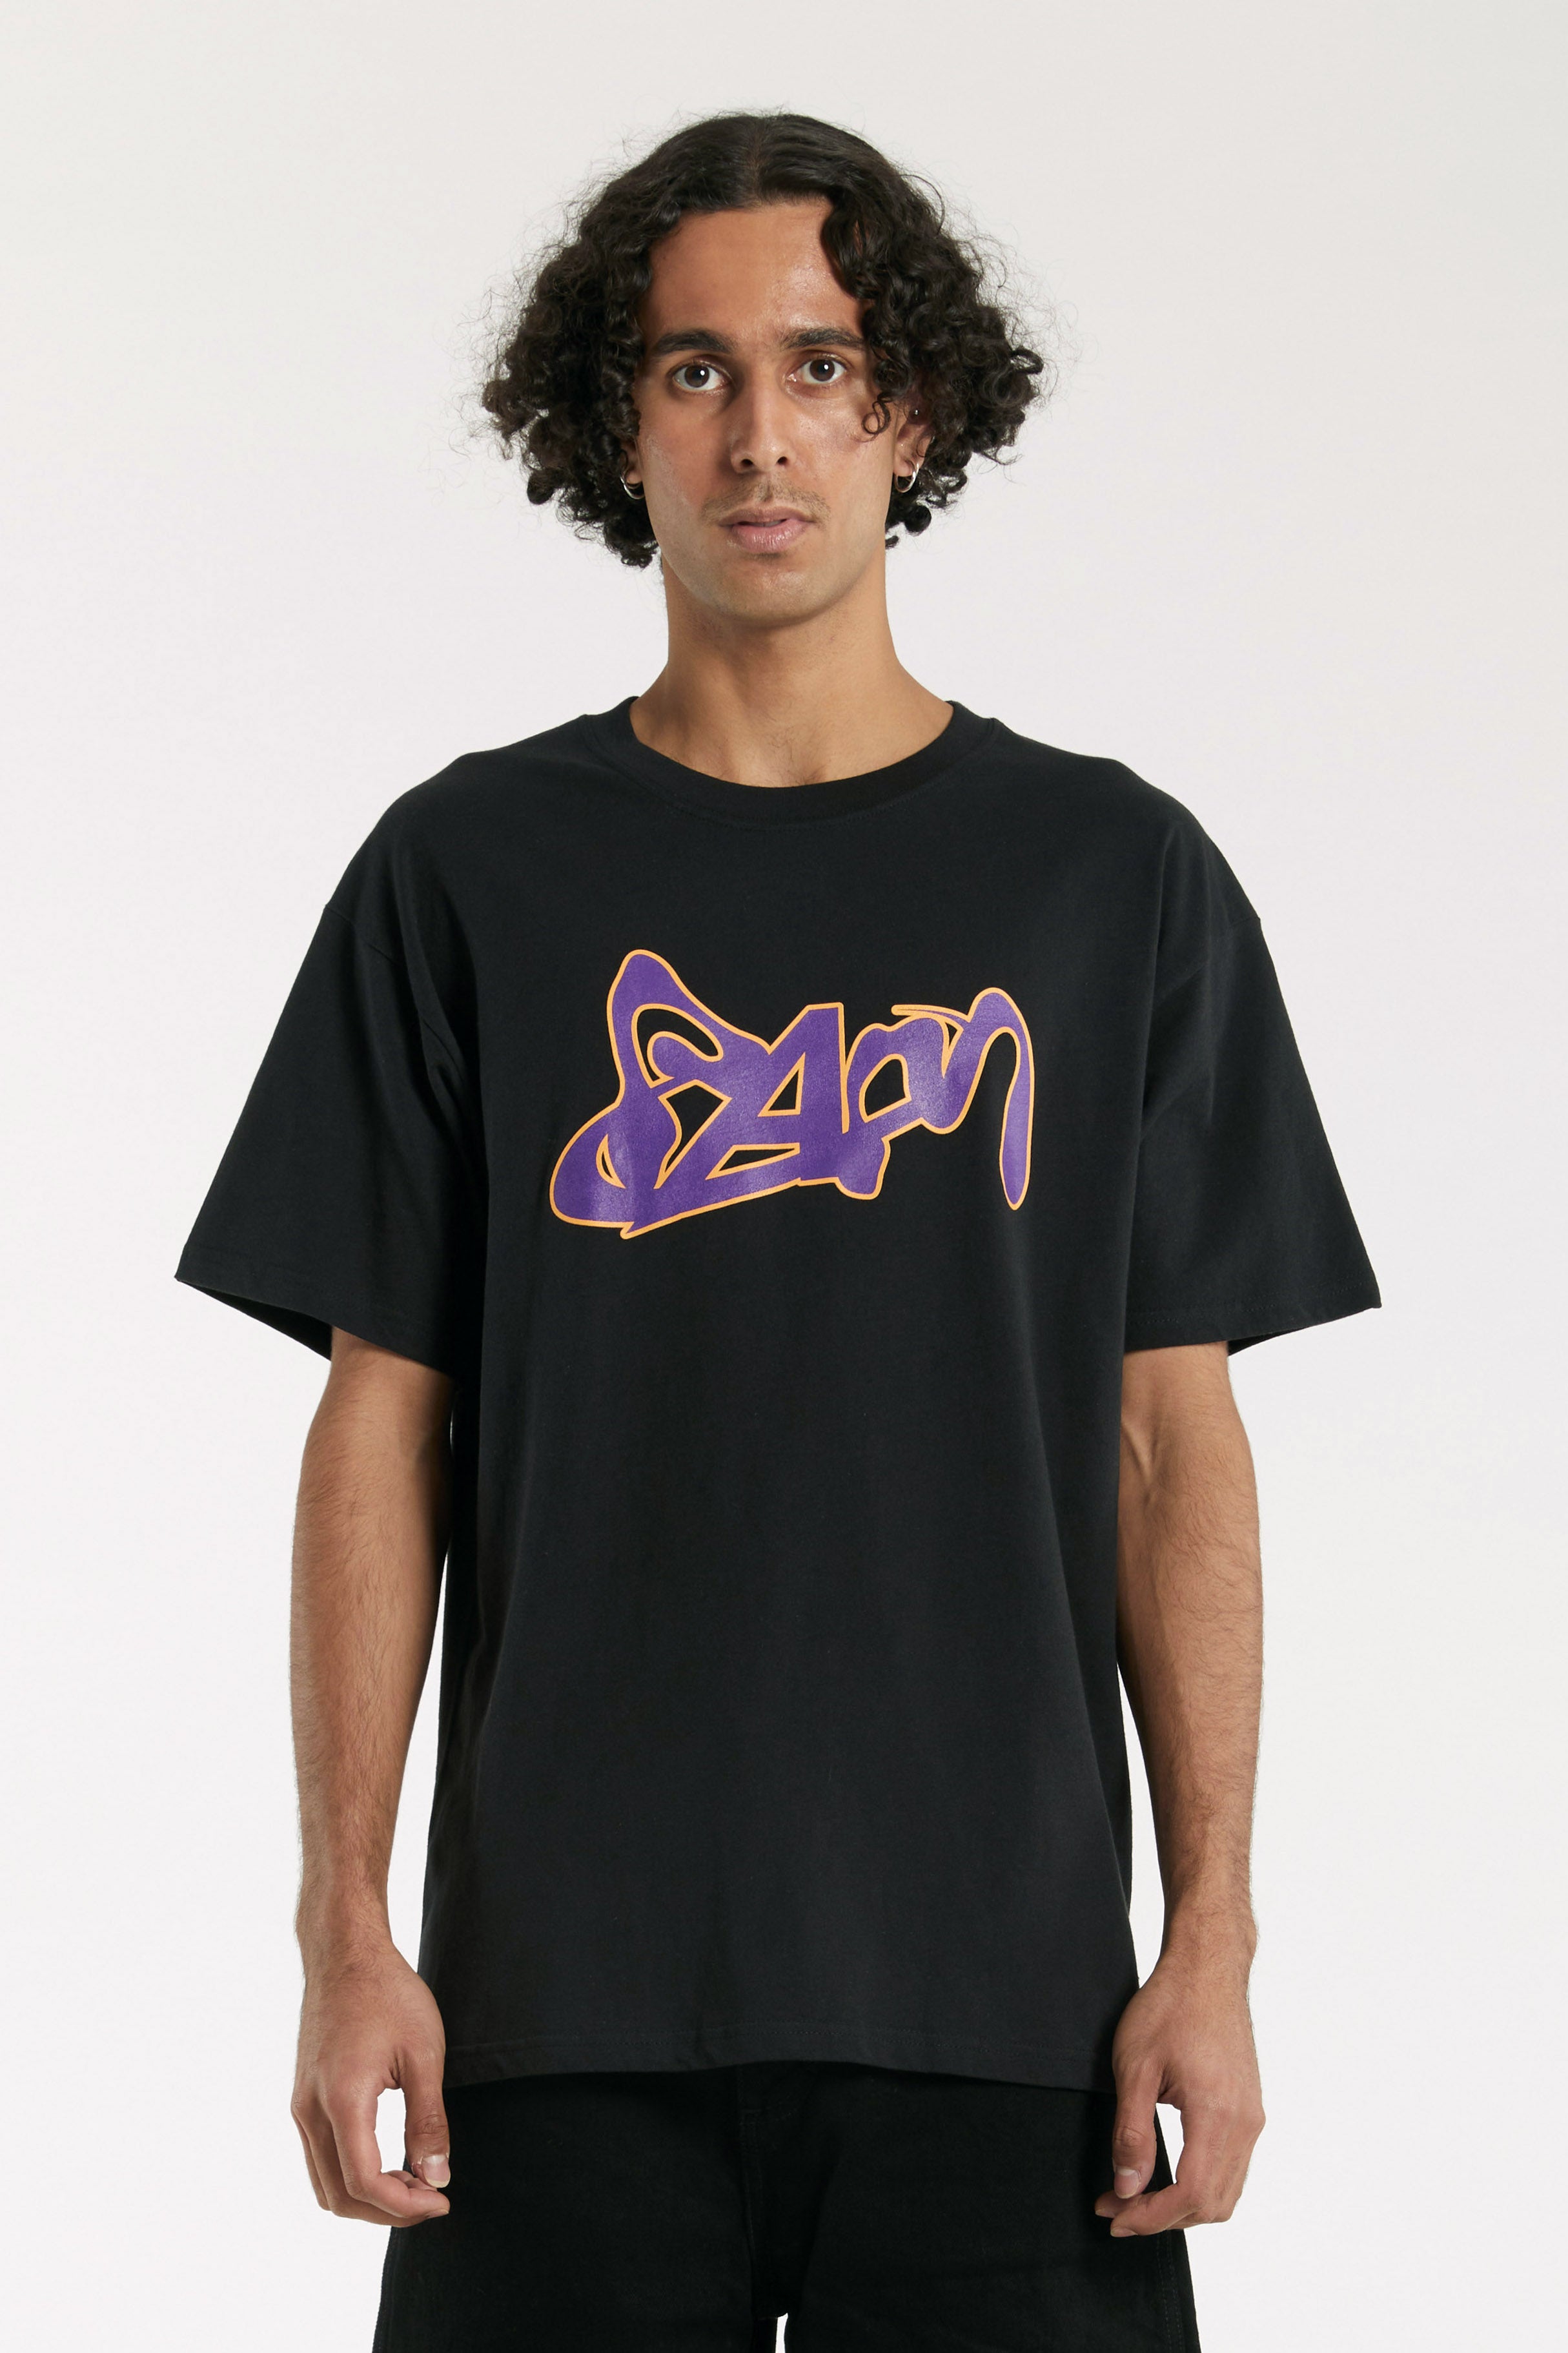 The P.A.M. X ANSWER SS TEE BLACK available online with global shipping, and in PAM Stores Melbourne and Sydney.